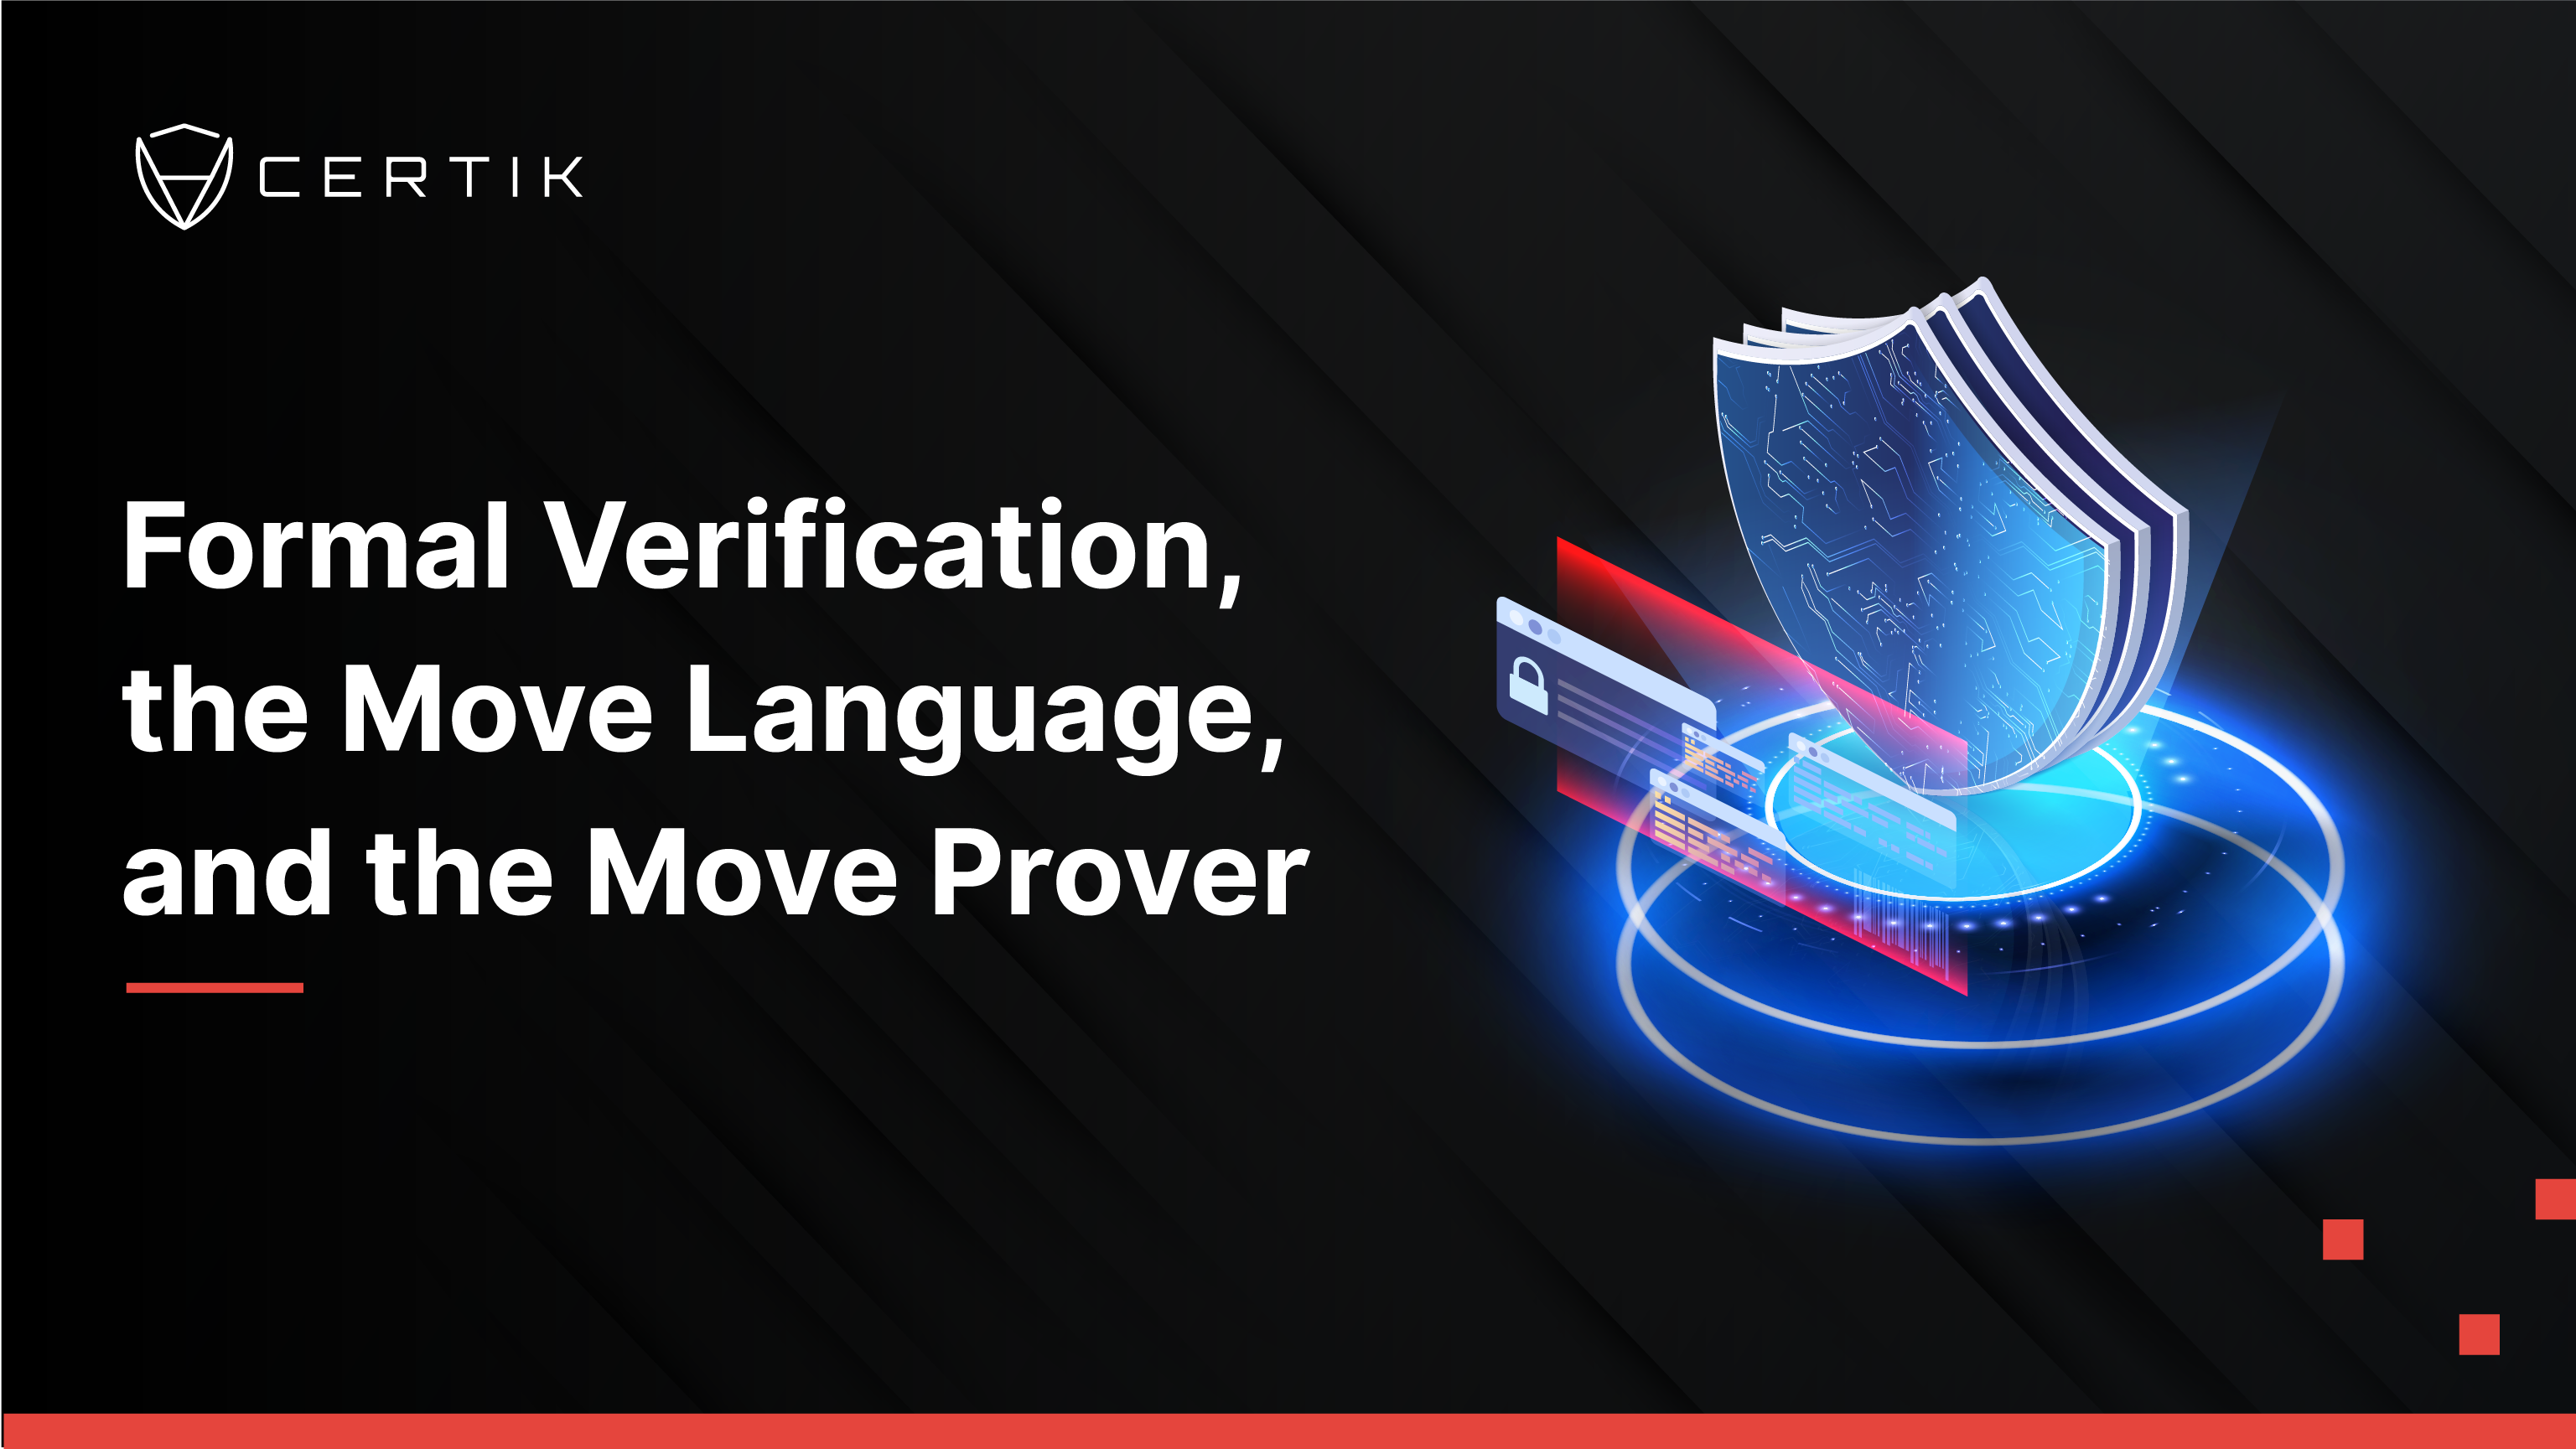 Formal Verification, the Move Language, and the Move Prover